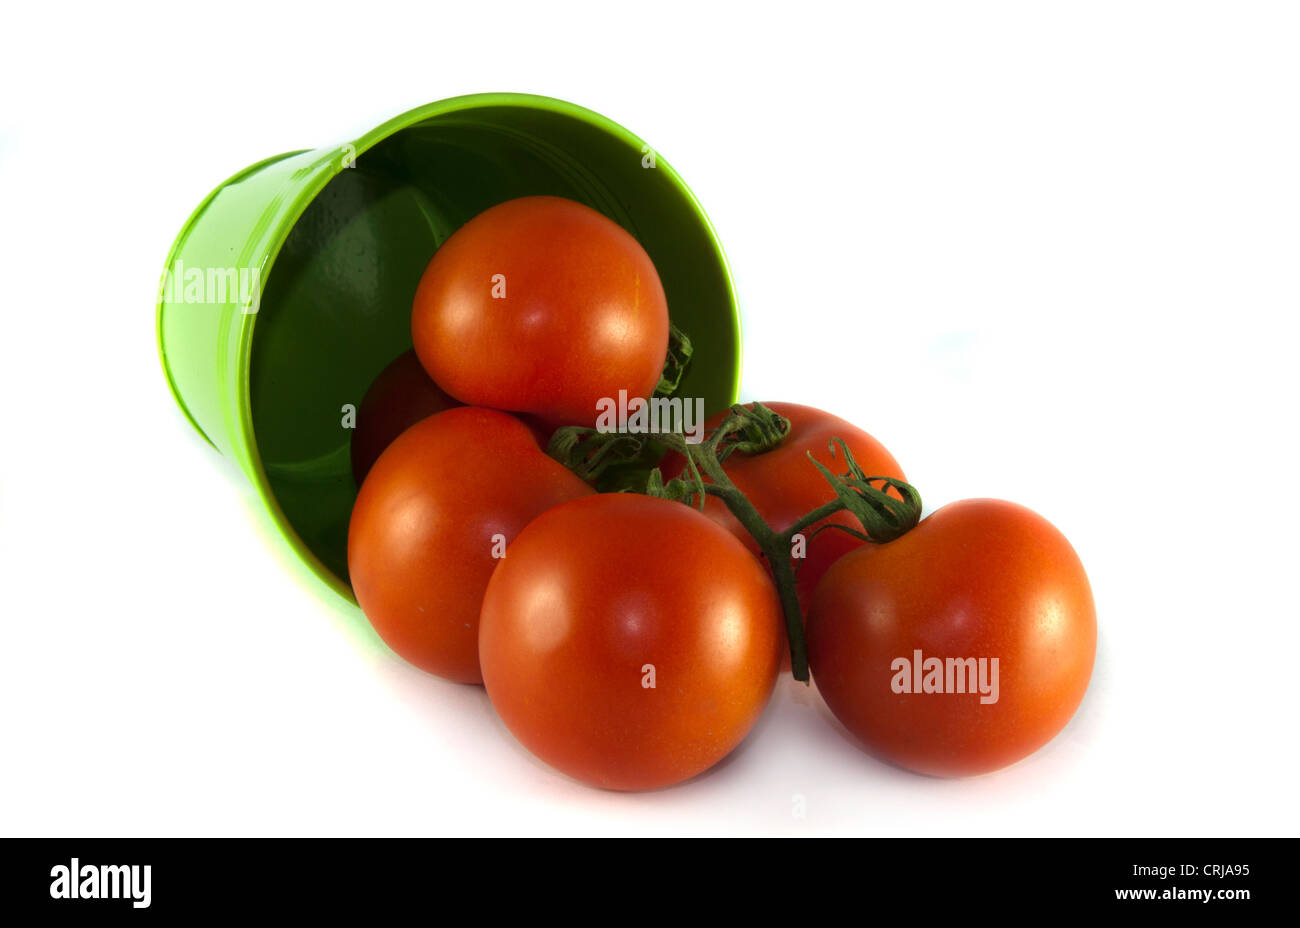 green container with red tomatoes on isolated white background Stock Photo